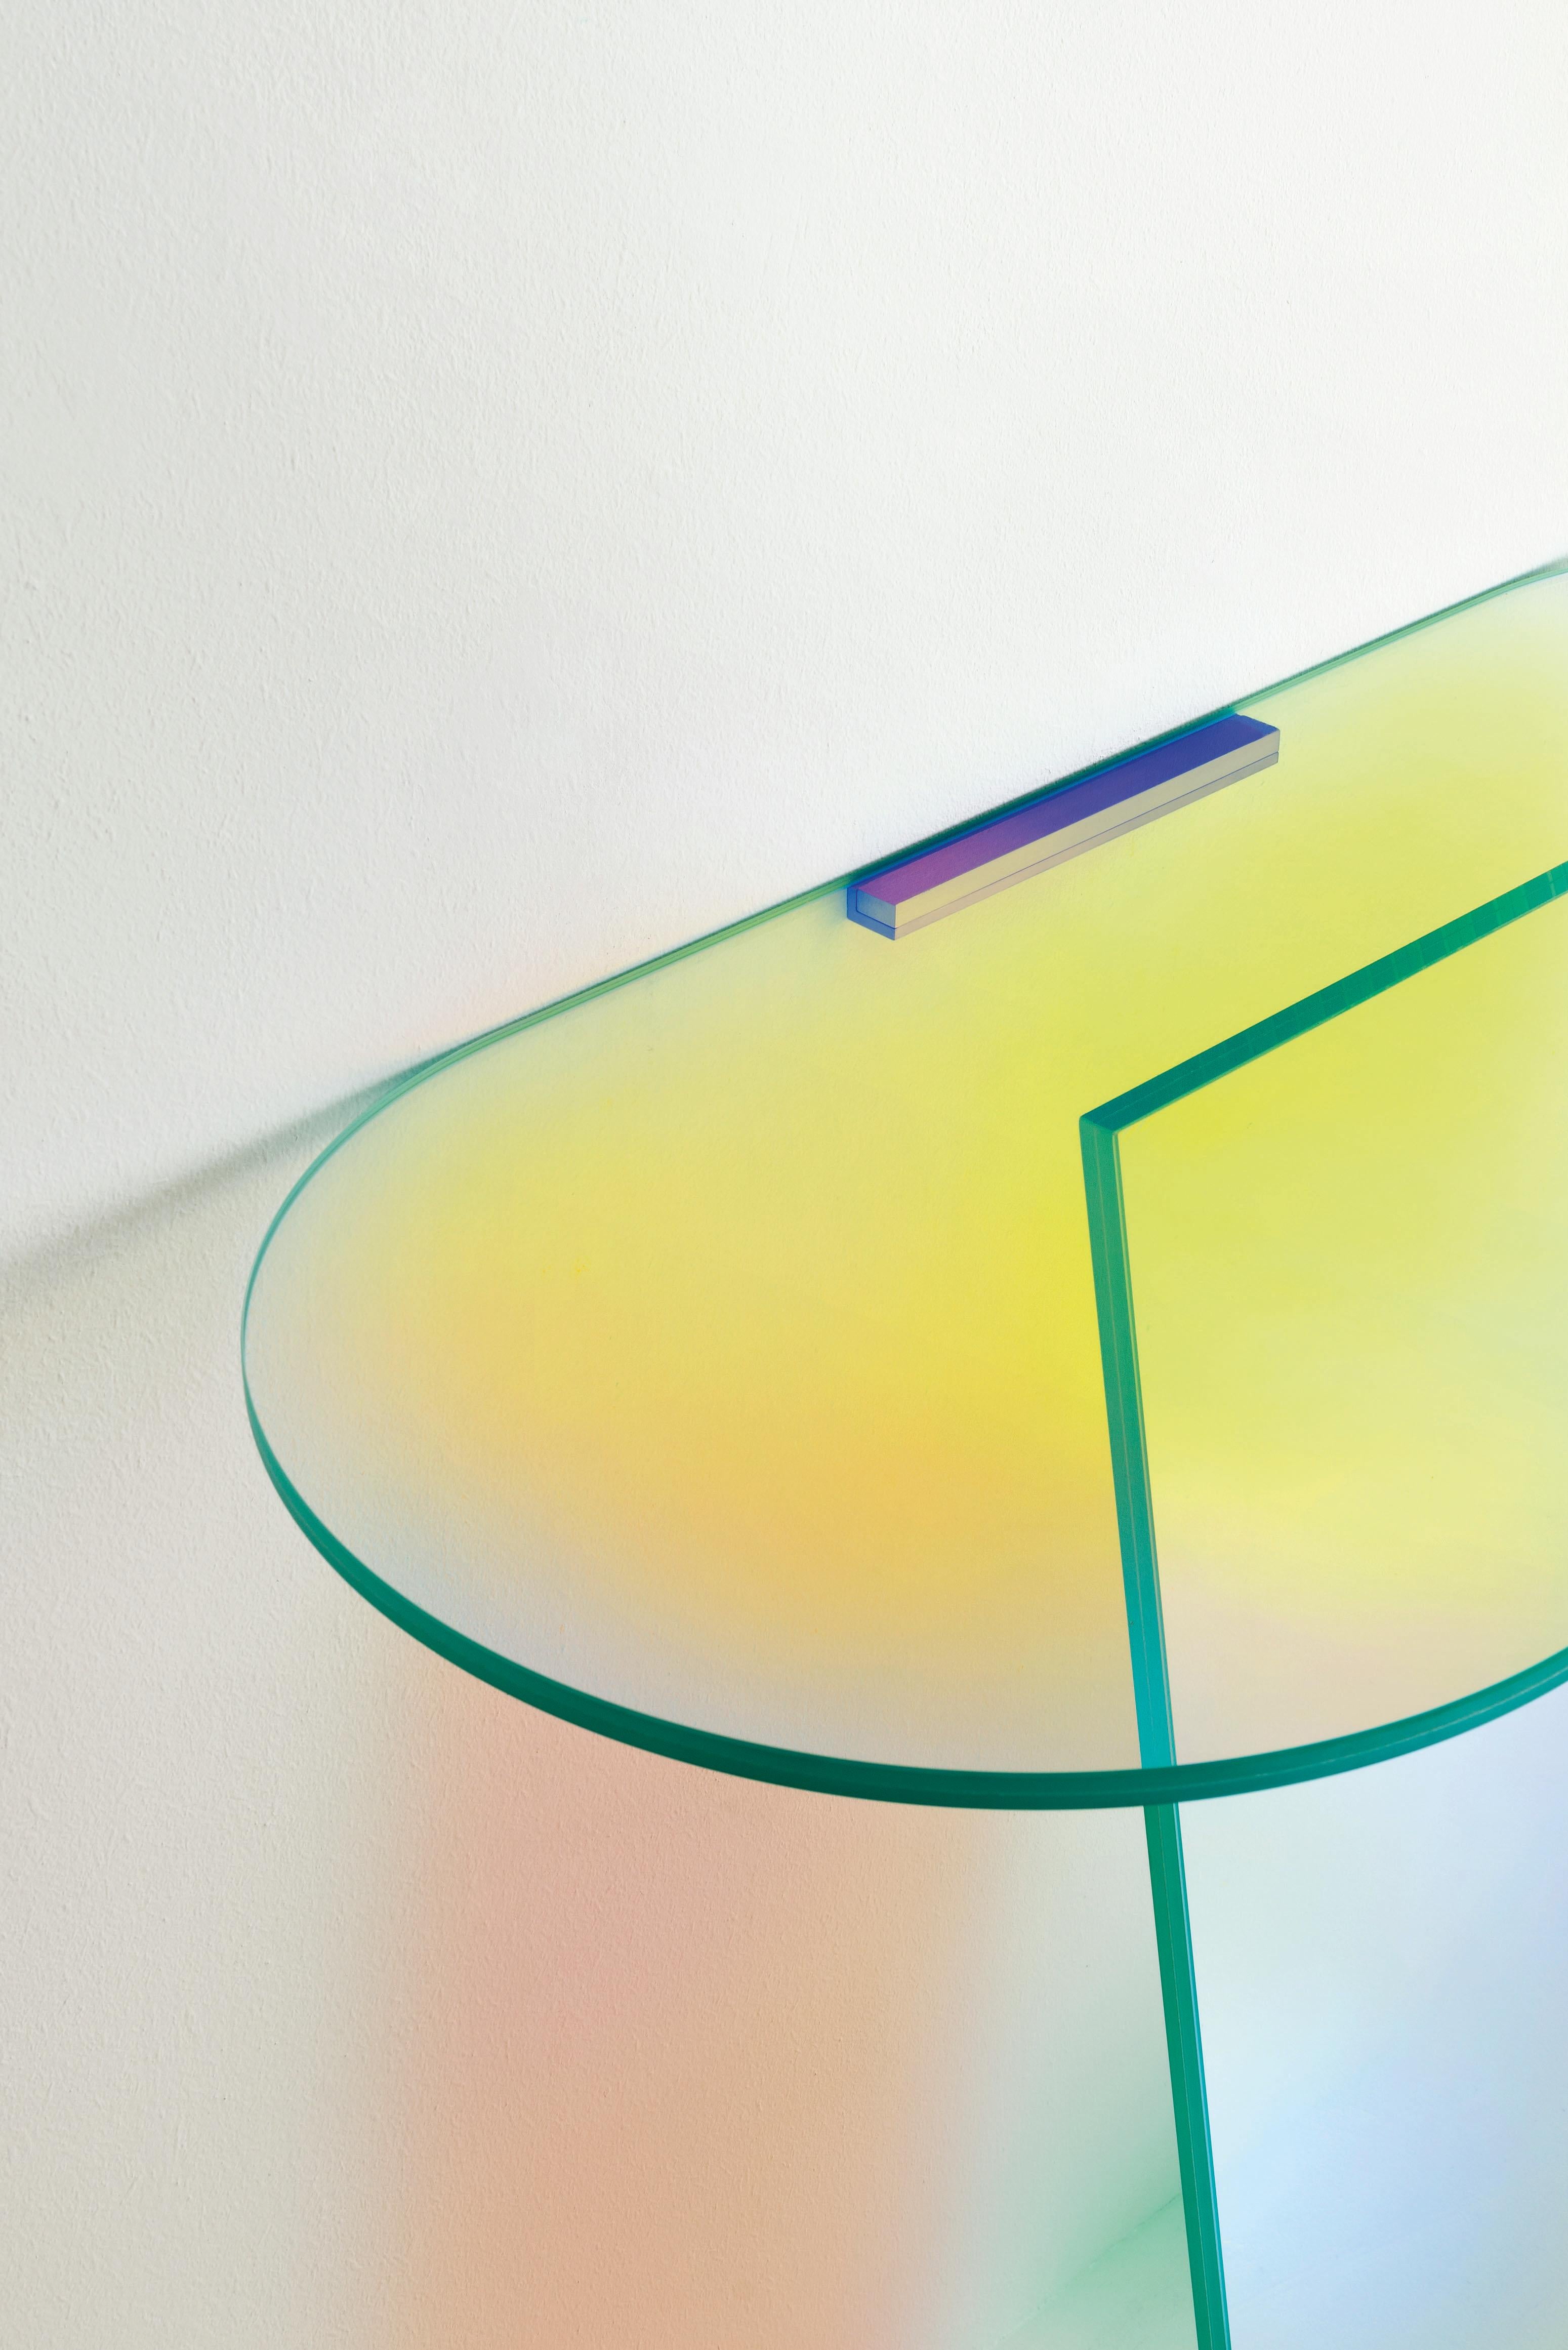 Shimmer console table is shown here in the laminated and glued glass. The collection is available in high tables, low tables and consoles in laminated and glued glass, characterized by a special iridescent multichromatic finish; the nuance varies